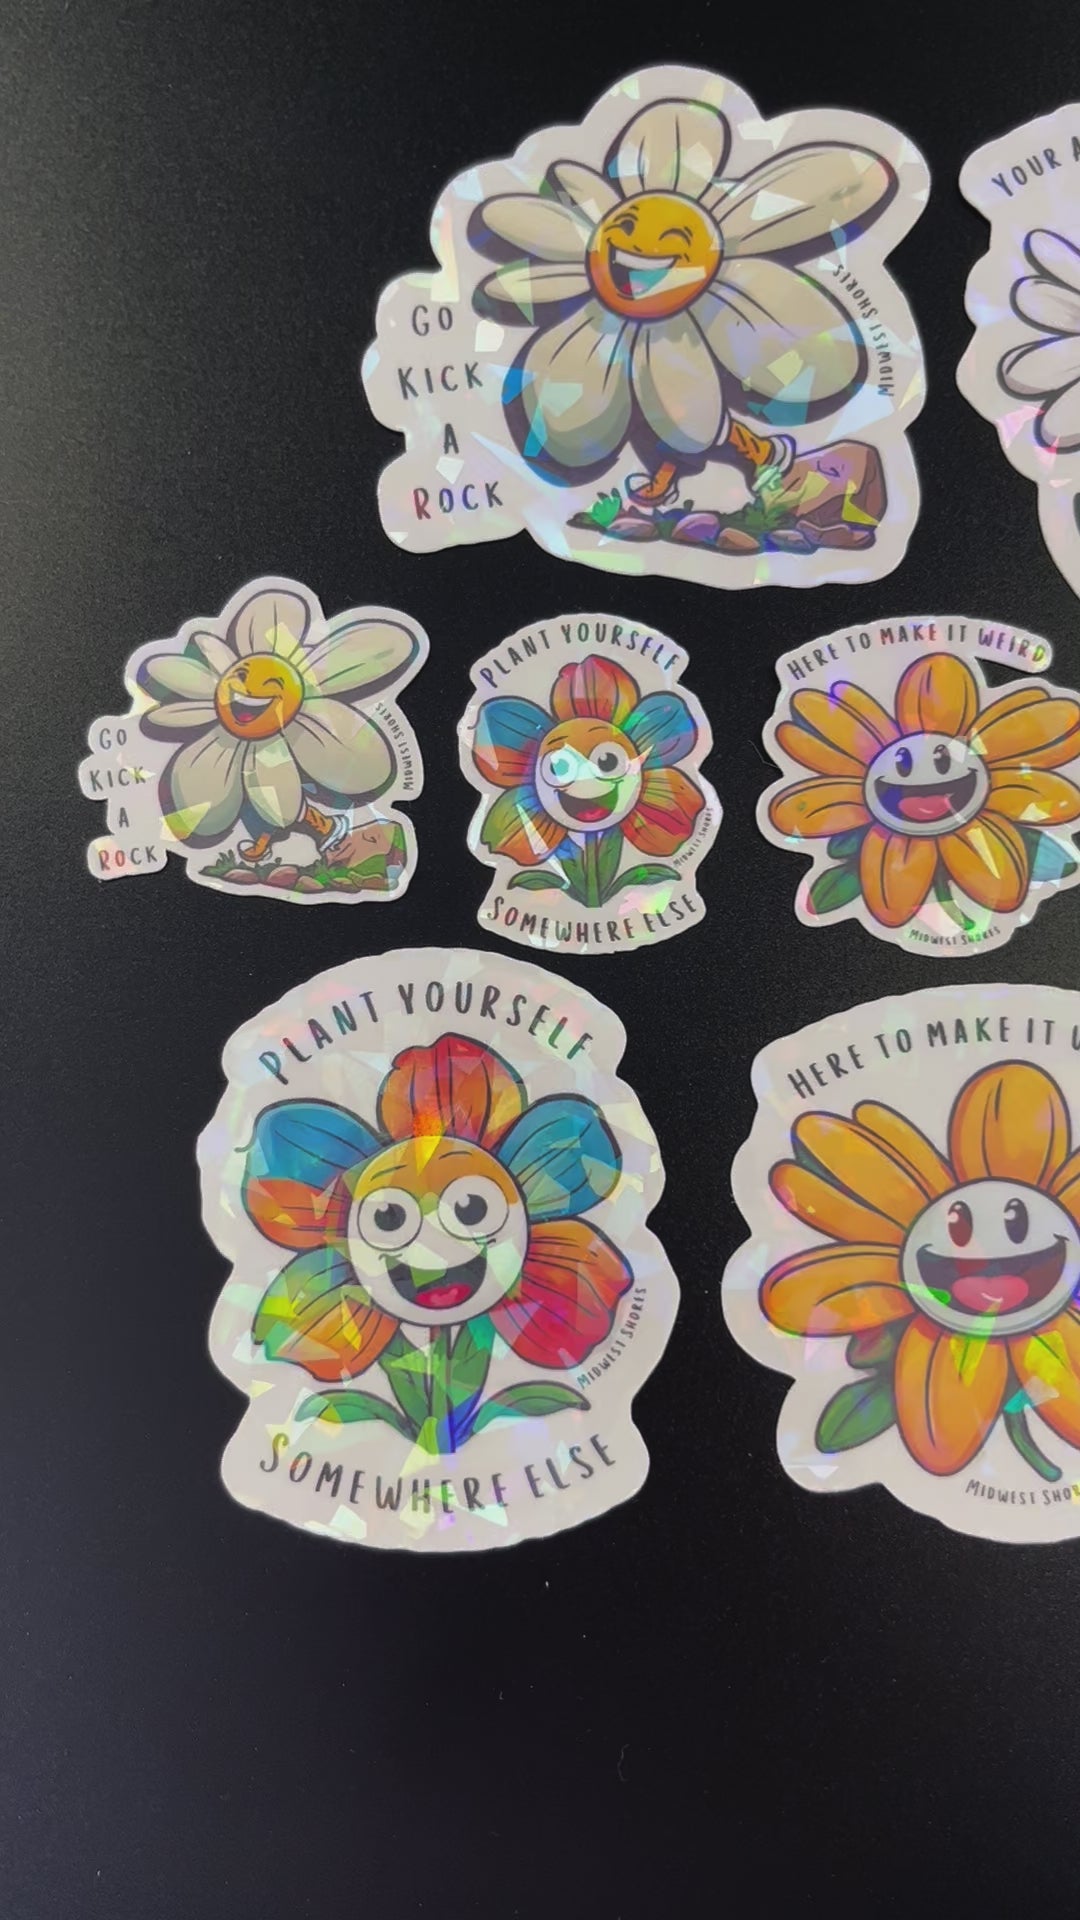 Full collection of demented daisy stickers 